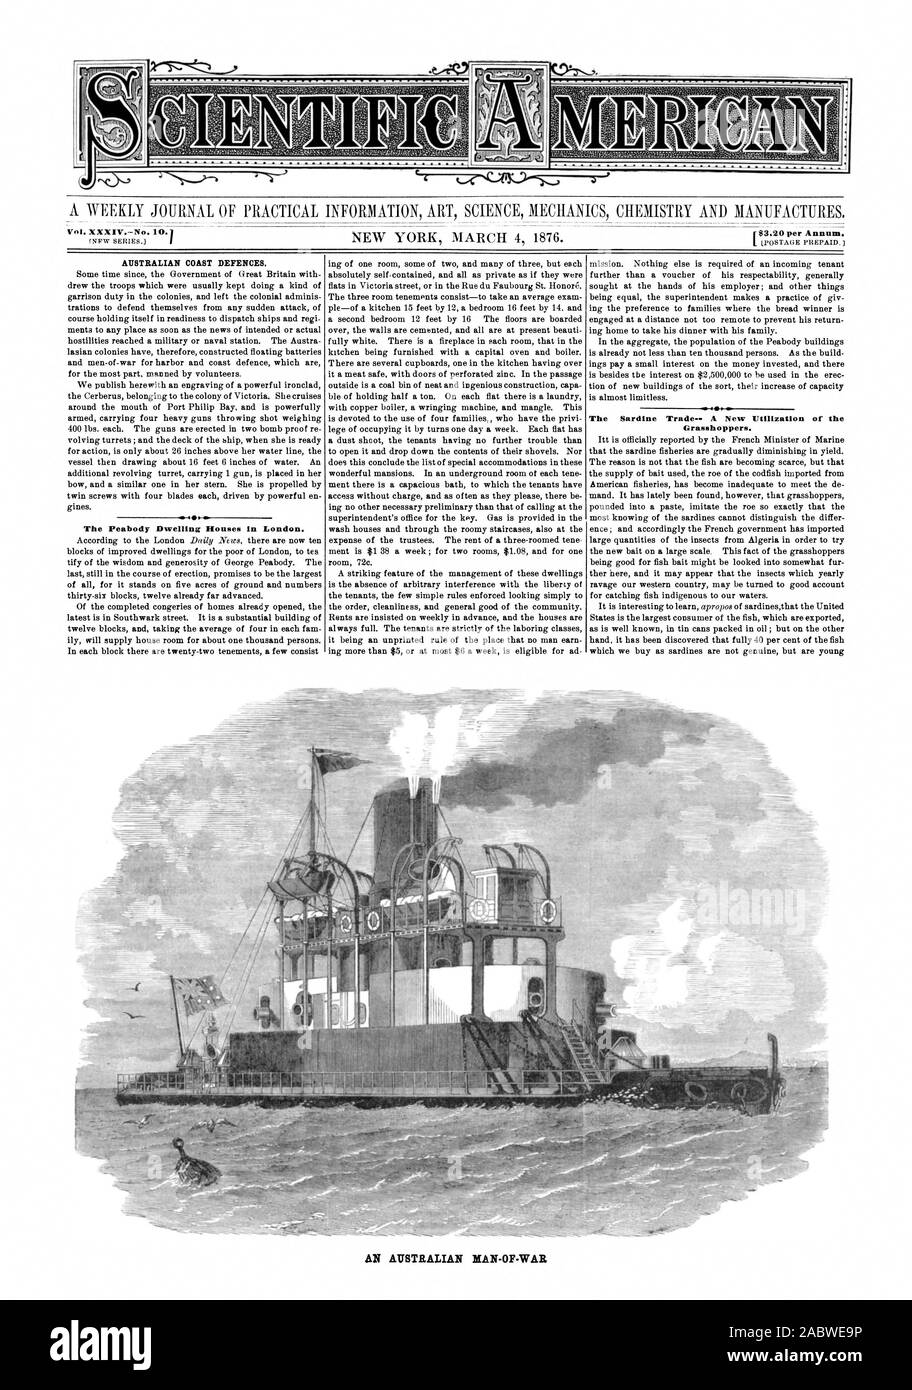 Vol. XXXIVNo. 10. 3.20 per Annum. 1 P AUSTRALIAN COAST DEFENCES. -cos The Peabody Dwelling Houses in London. The Sardine Trade-- A New Utilization of the Grasshoppers. AN AUSTRALIAN MAN-OF-WAR, scientific american, 1876-03-04 Stock Photo